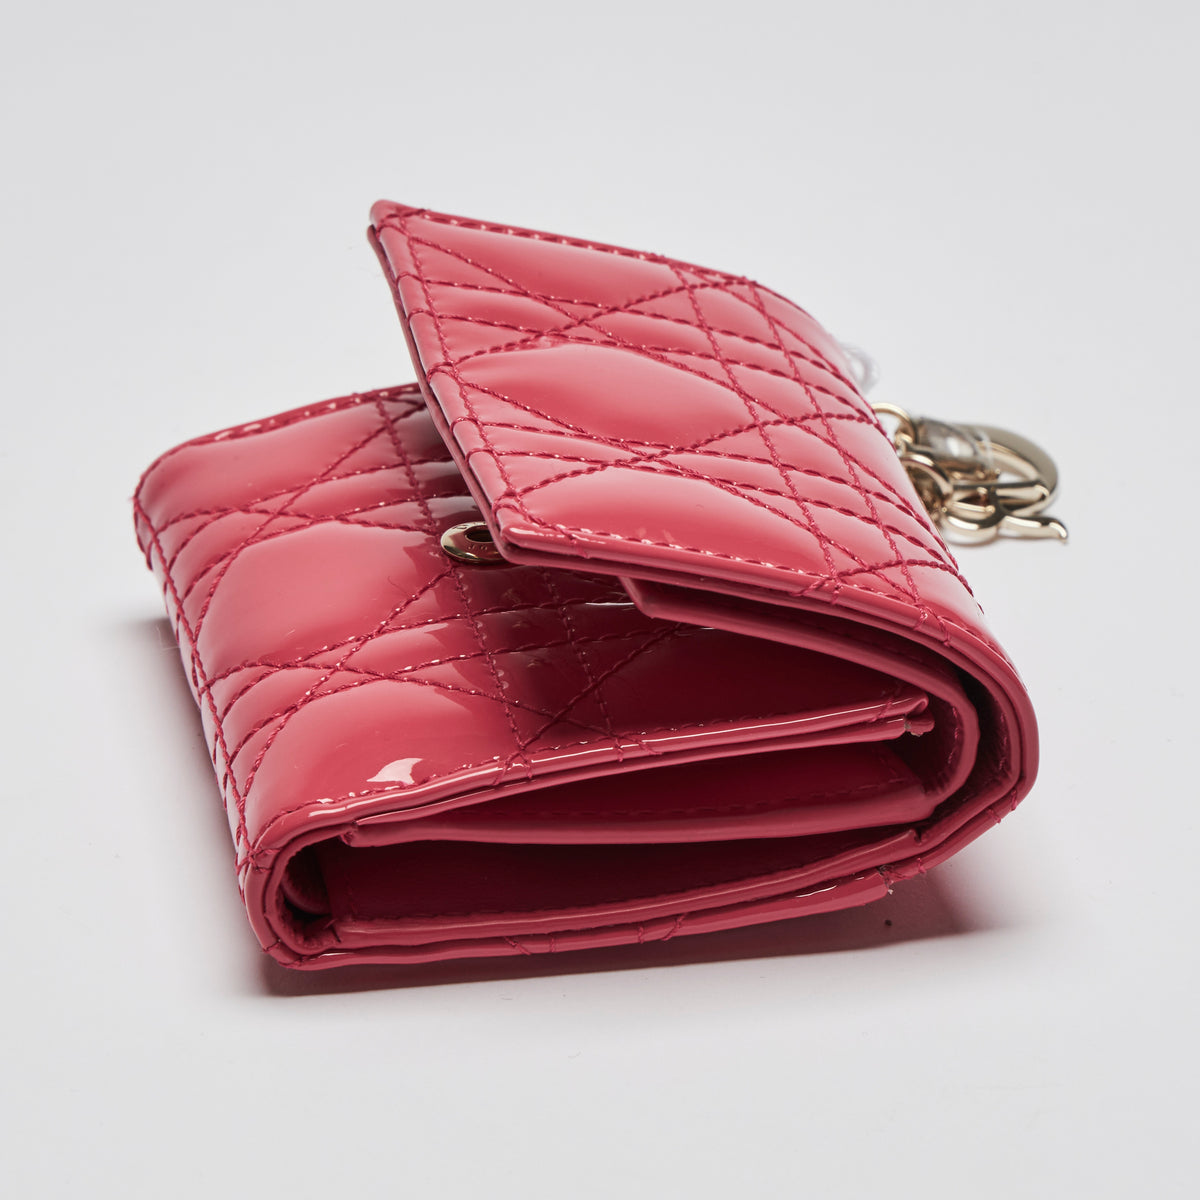 Excellent Pre-Loved Pink and Blue Patent Leather Cannage Motif Trifold Compact Wallets. (side pink)